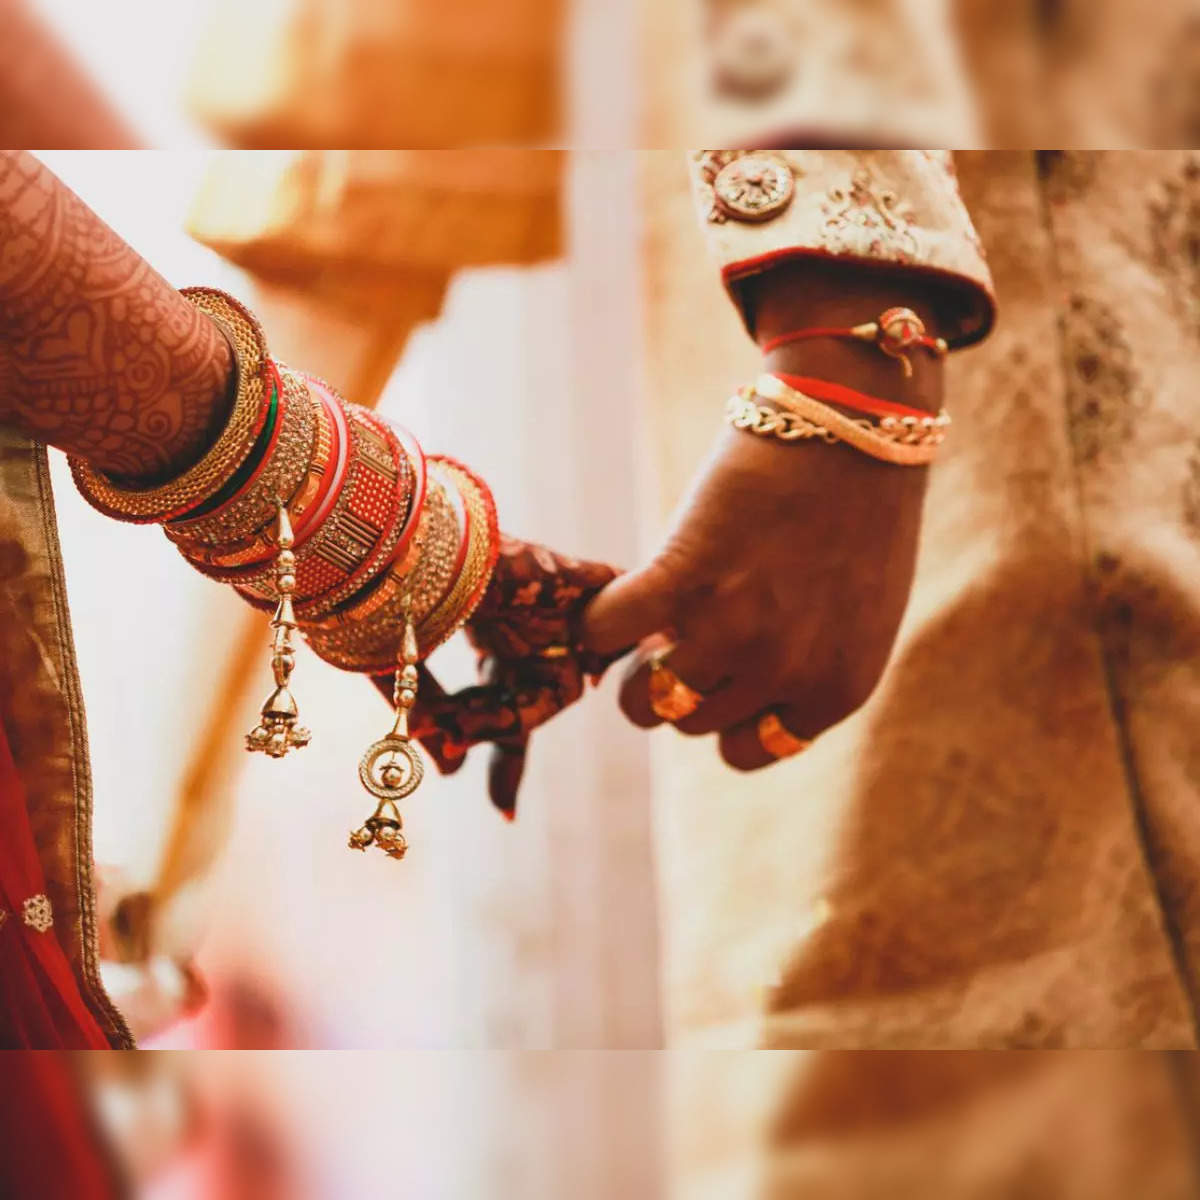 Indian wedding season likely to give a boost to brands, malls